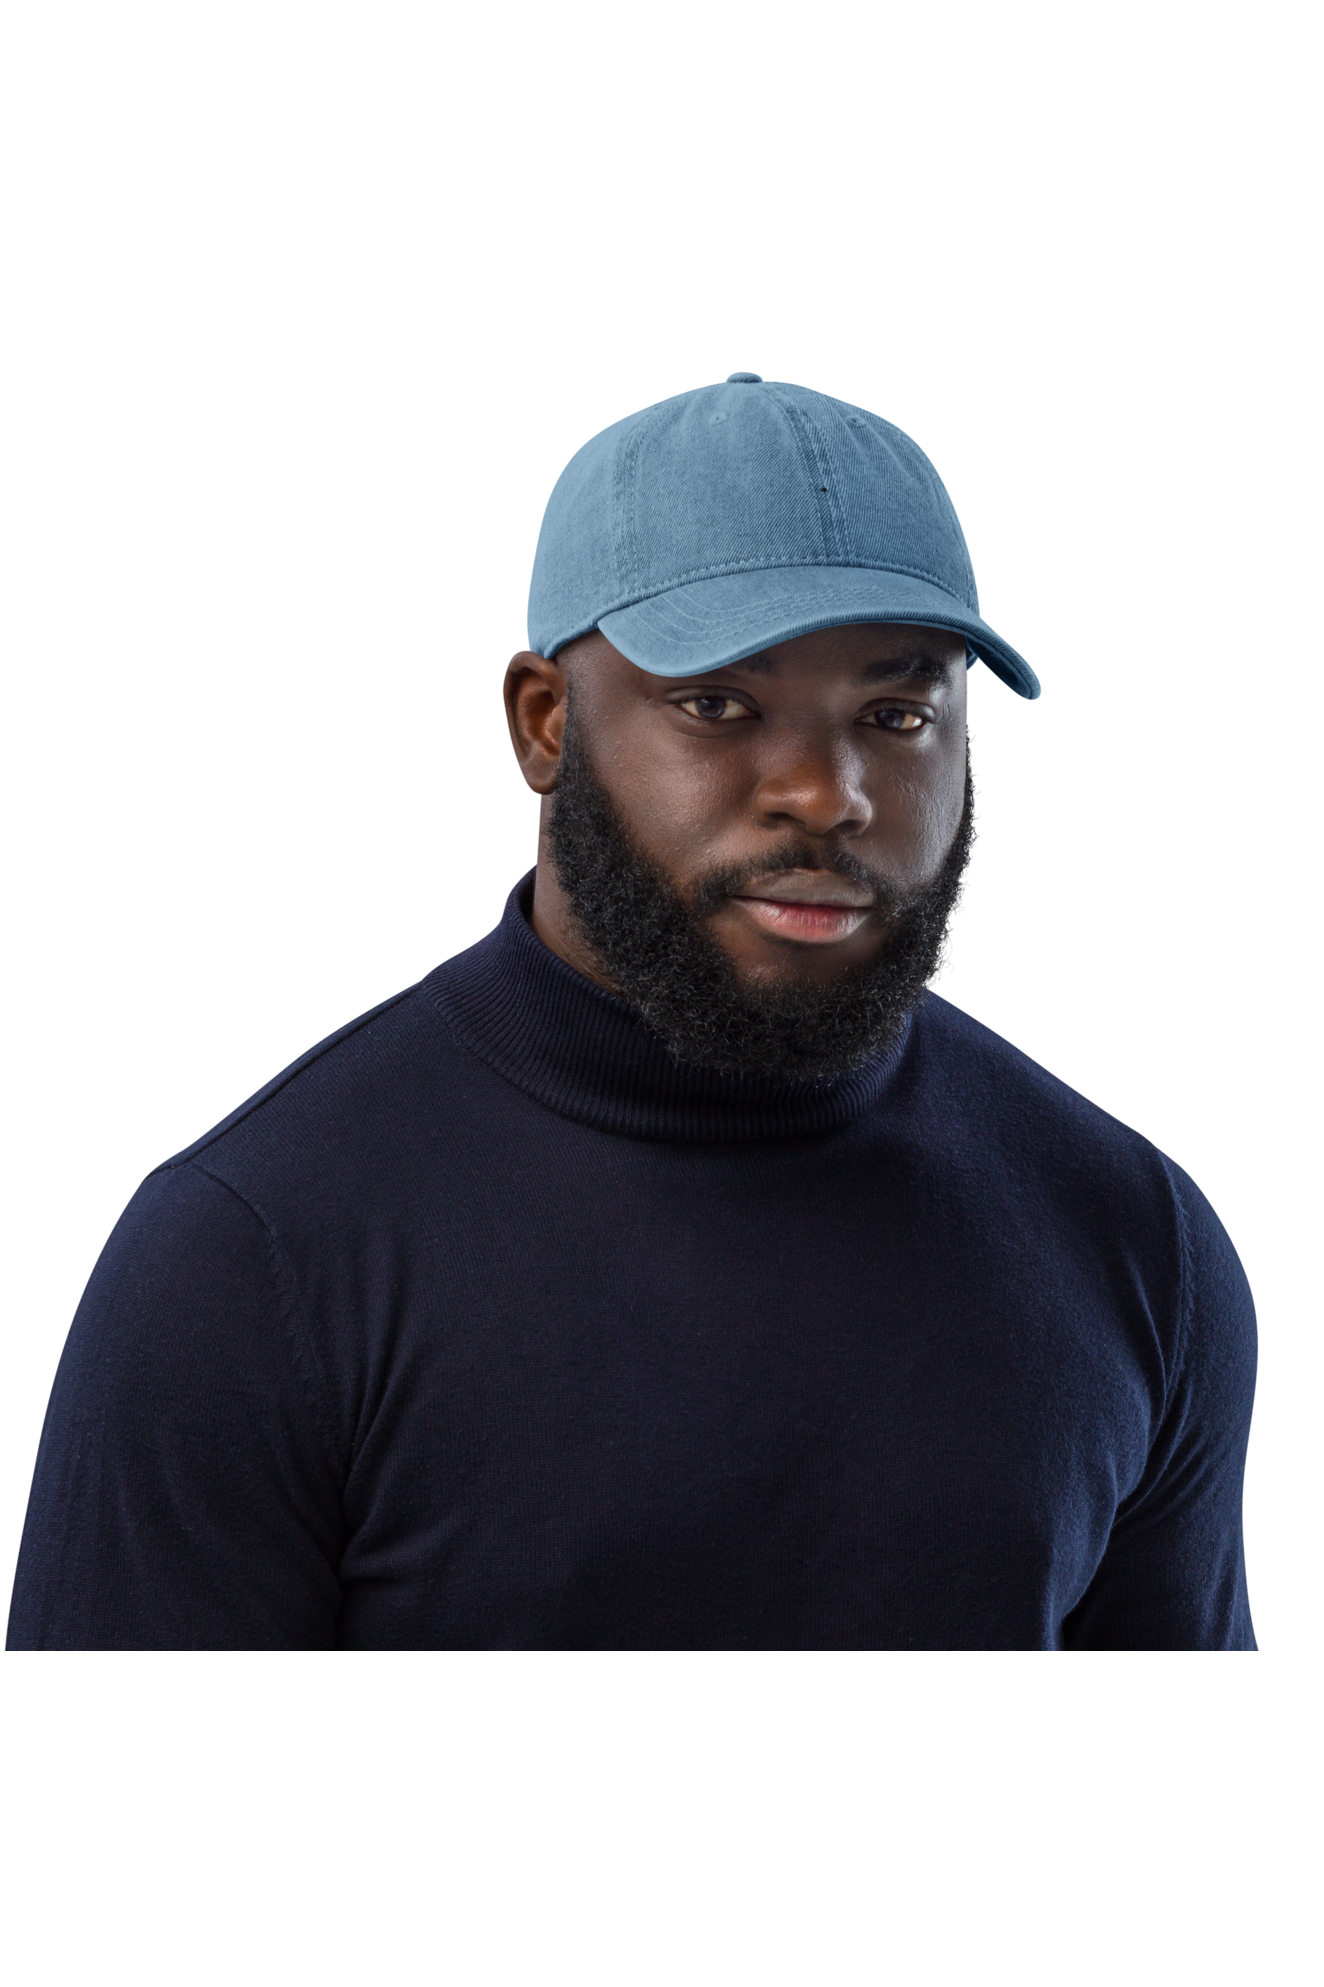 Classic Dad Hat Mock Up (See your logo on the product) - BRNDURNAME